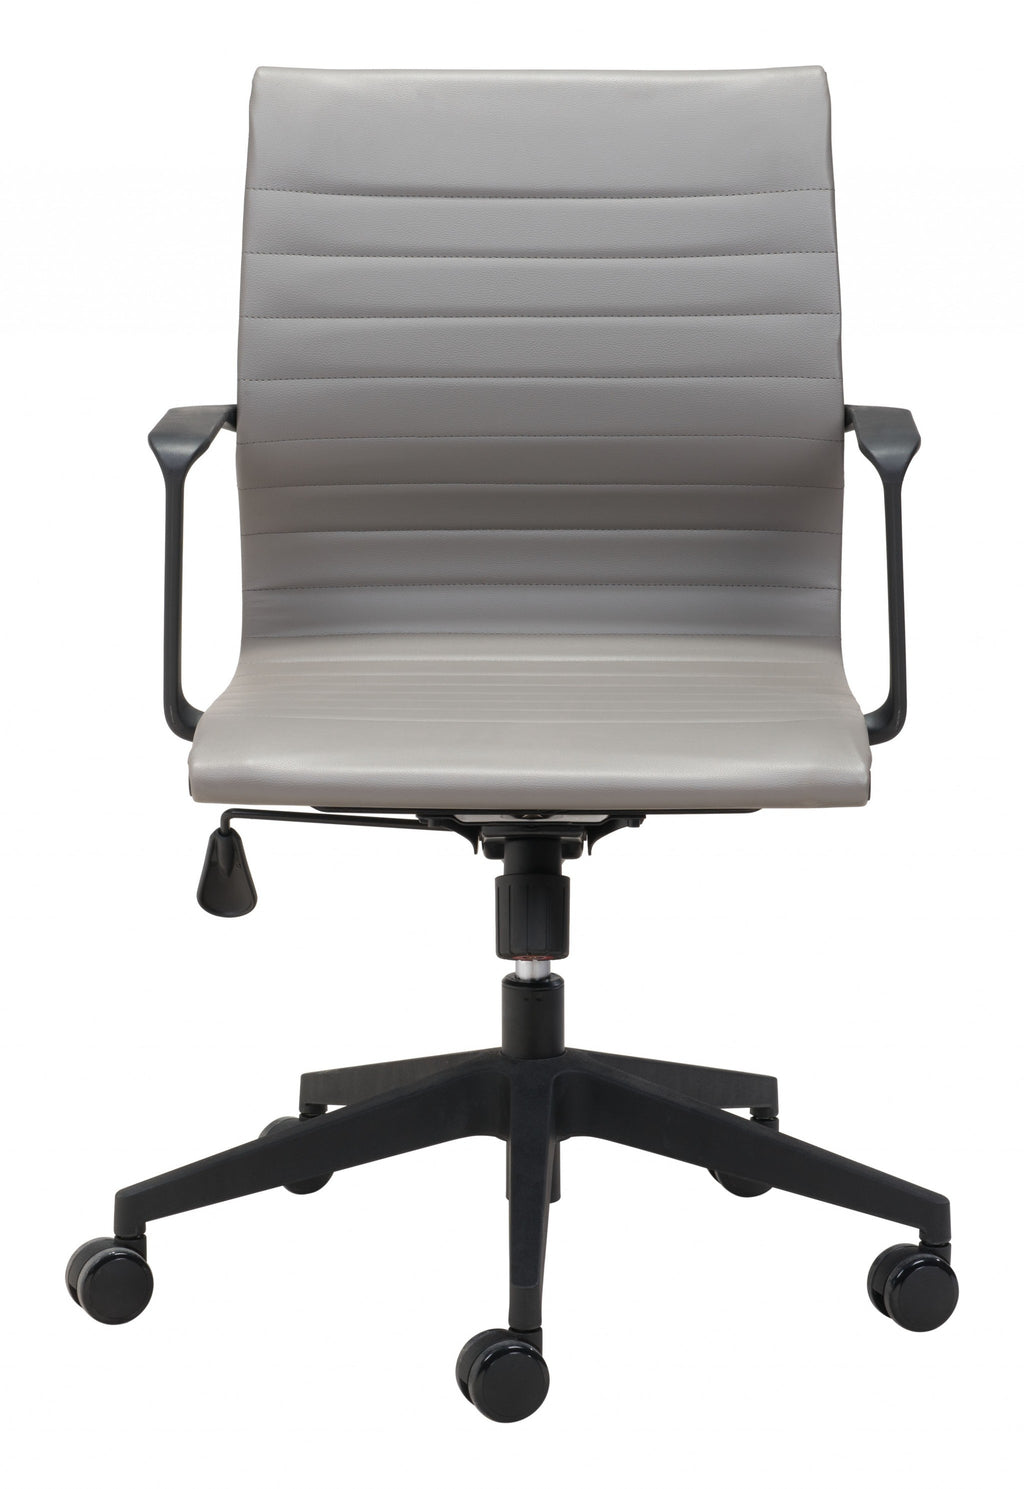 Gray Faux Leather Seat Swivel Adjustable Task Chair Metal Back Steel Frame - 99fab 